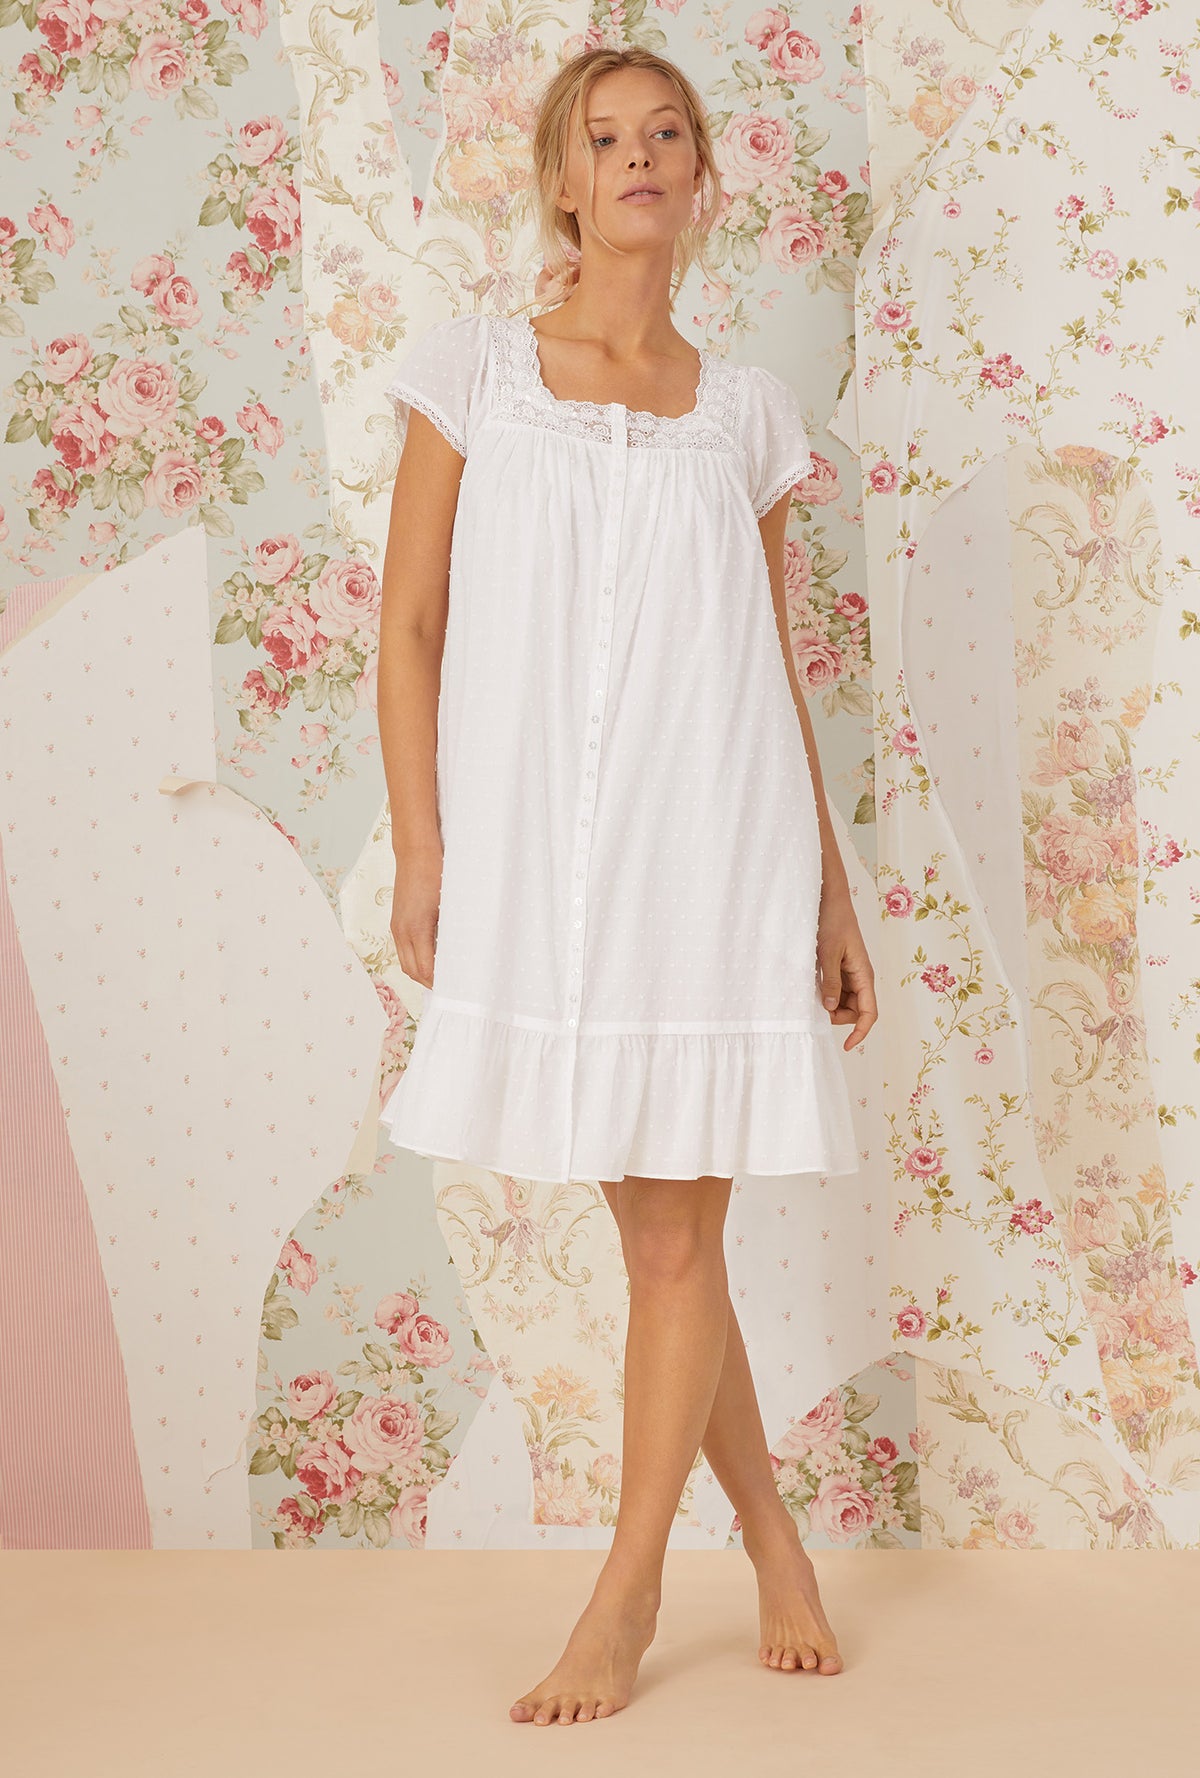 New Day White Cotton Swiss Dot Short Cap Sleeve Gown/Robe